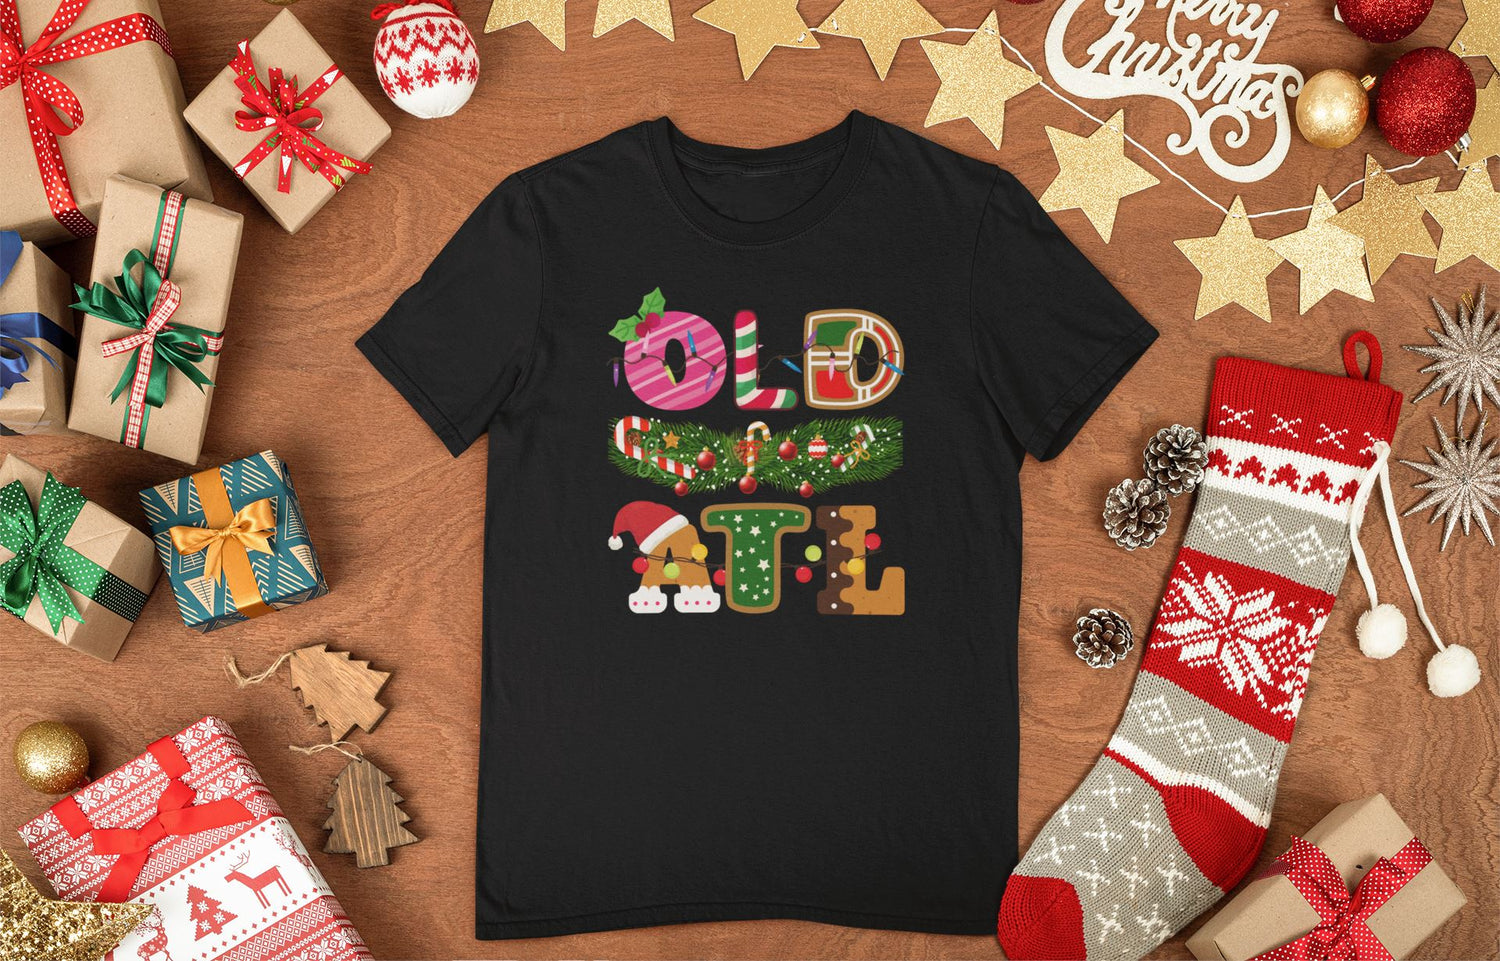 OLD ATL Holiday T-Shirt (Ugly Christmas Shirt) B1ack By Design LLC Single Garland (Middle) S 